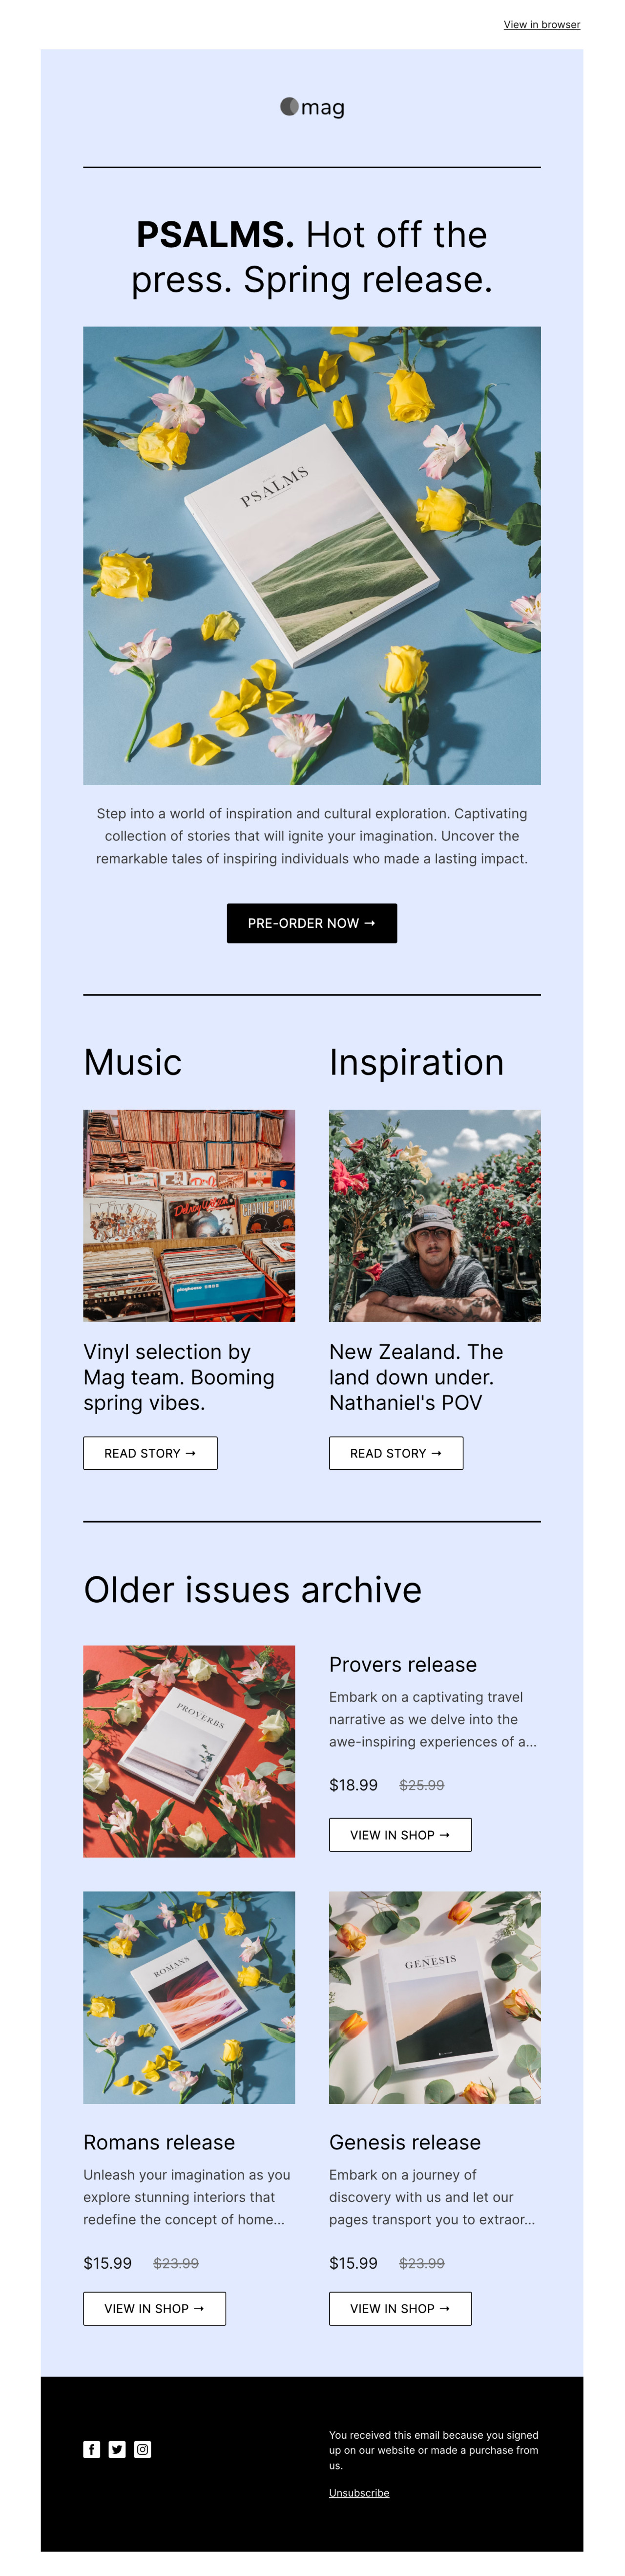 Magazine release template - Made by MailerLite